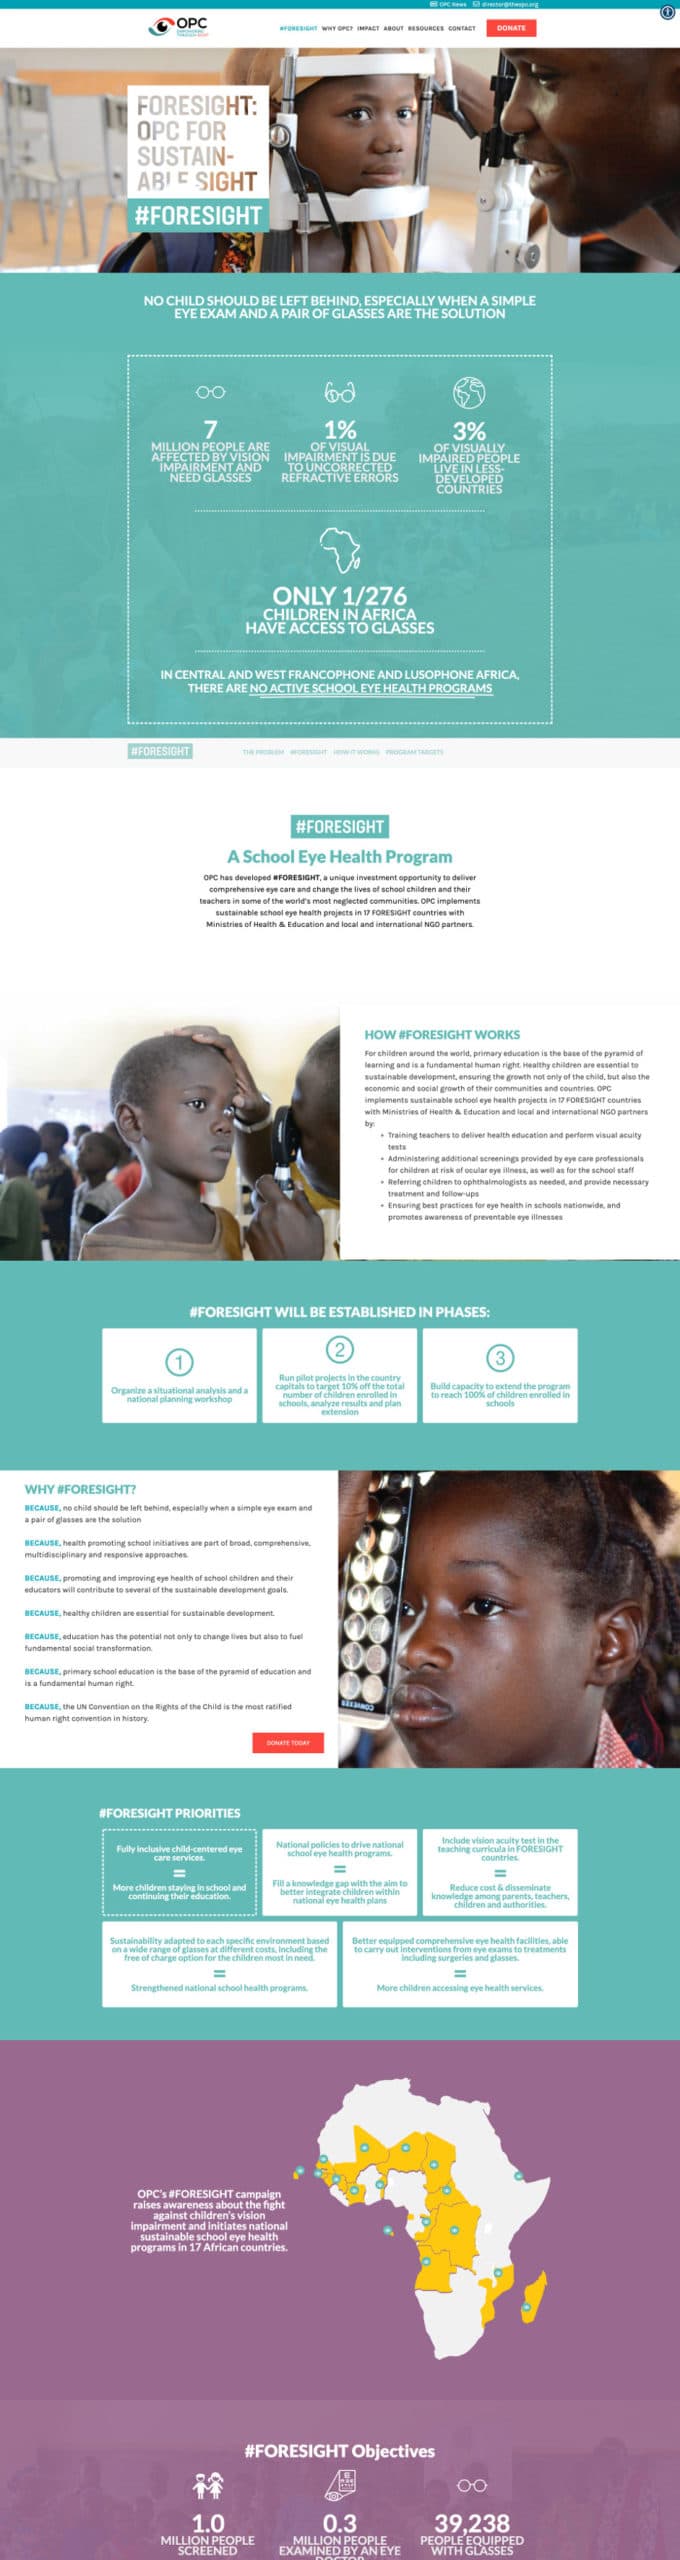 The Organization for the Prevention of Blindness wordpress website was developed by Good Agency. Good Agency is a nonprofit website design agency that specializes in nonprofit website design.